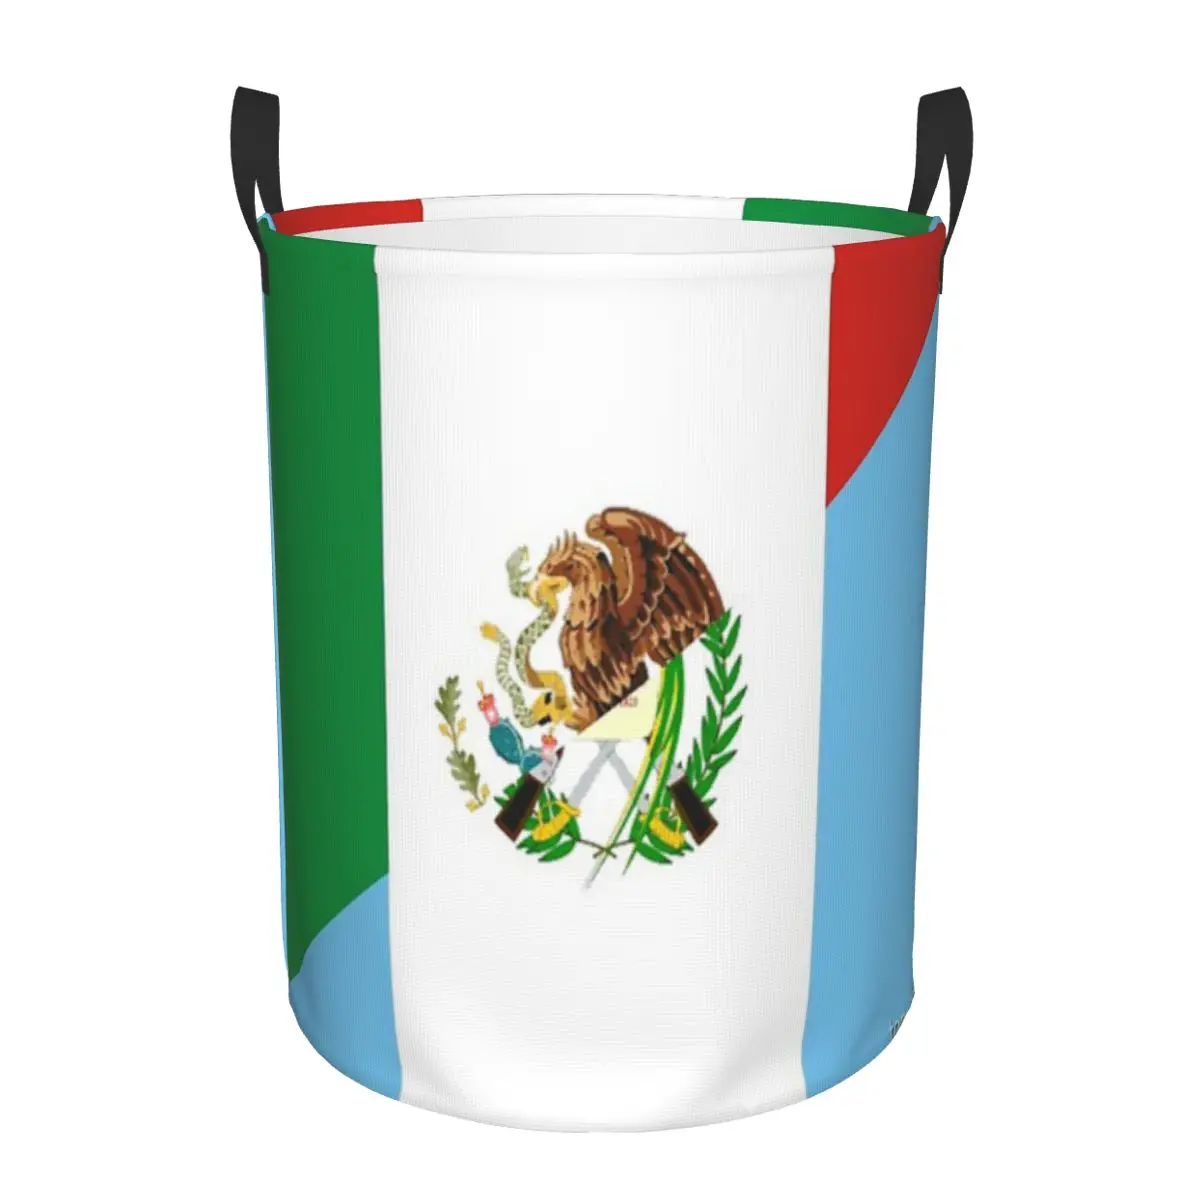 

Mexico Guatemala Flag Circular hamper,Storage Basket Sturdy and durableGreat for kitchensStorage of clothes